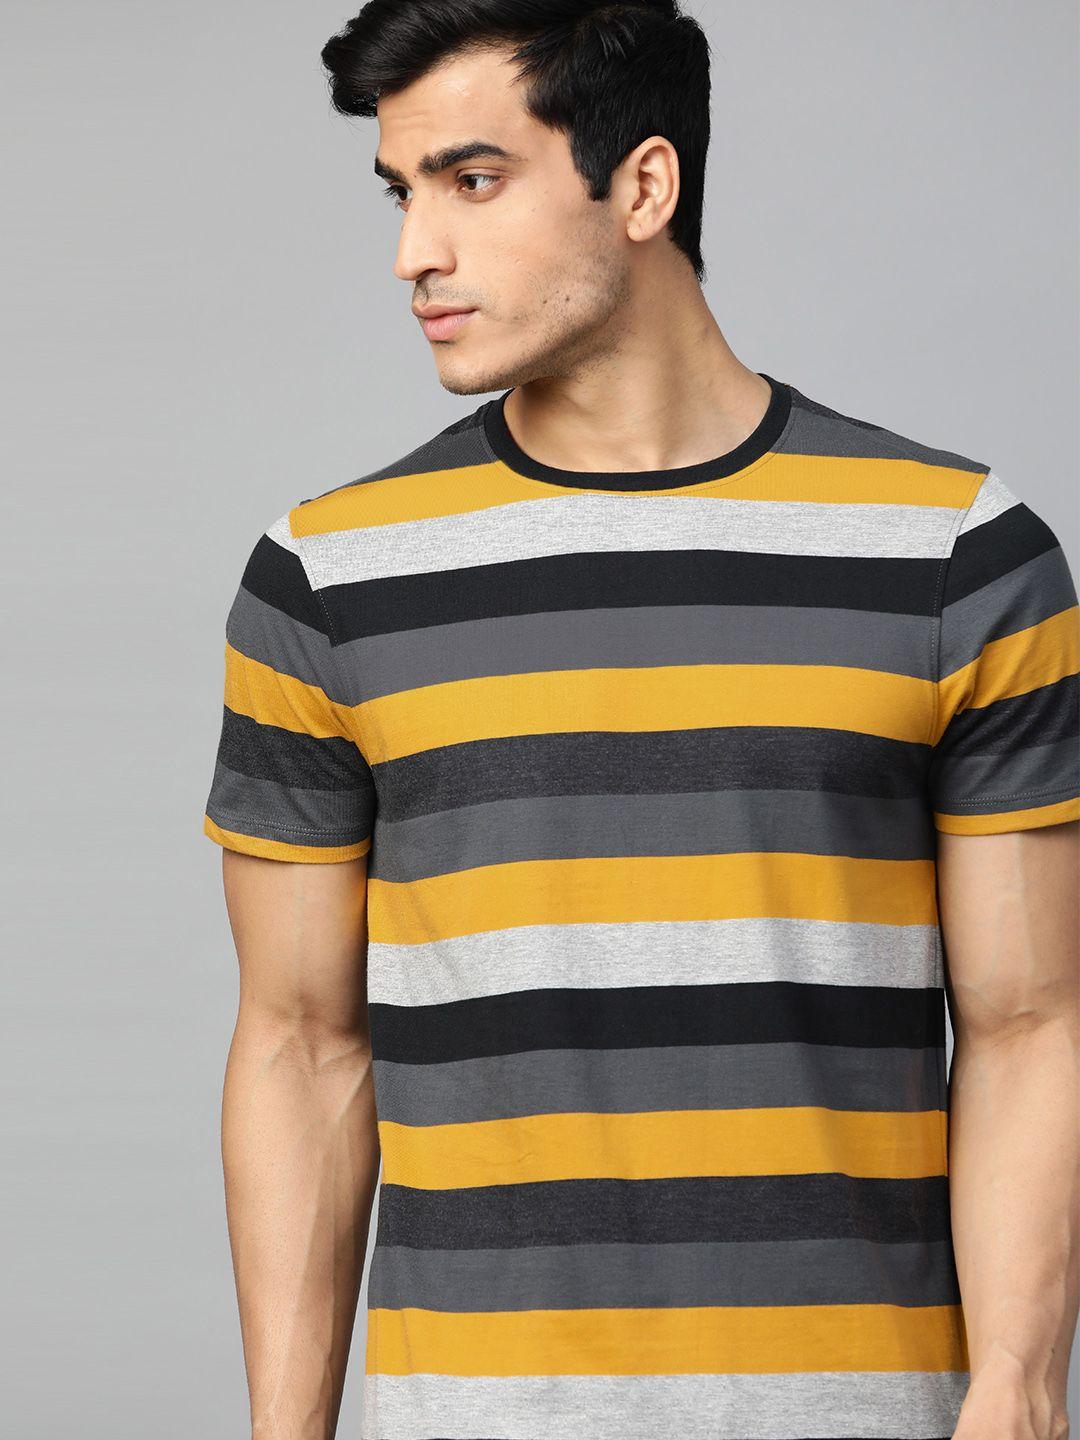 the roadster lifestyle co men mustard yellow  grey striped round neck pure cotton t-shirt